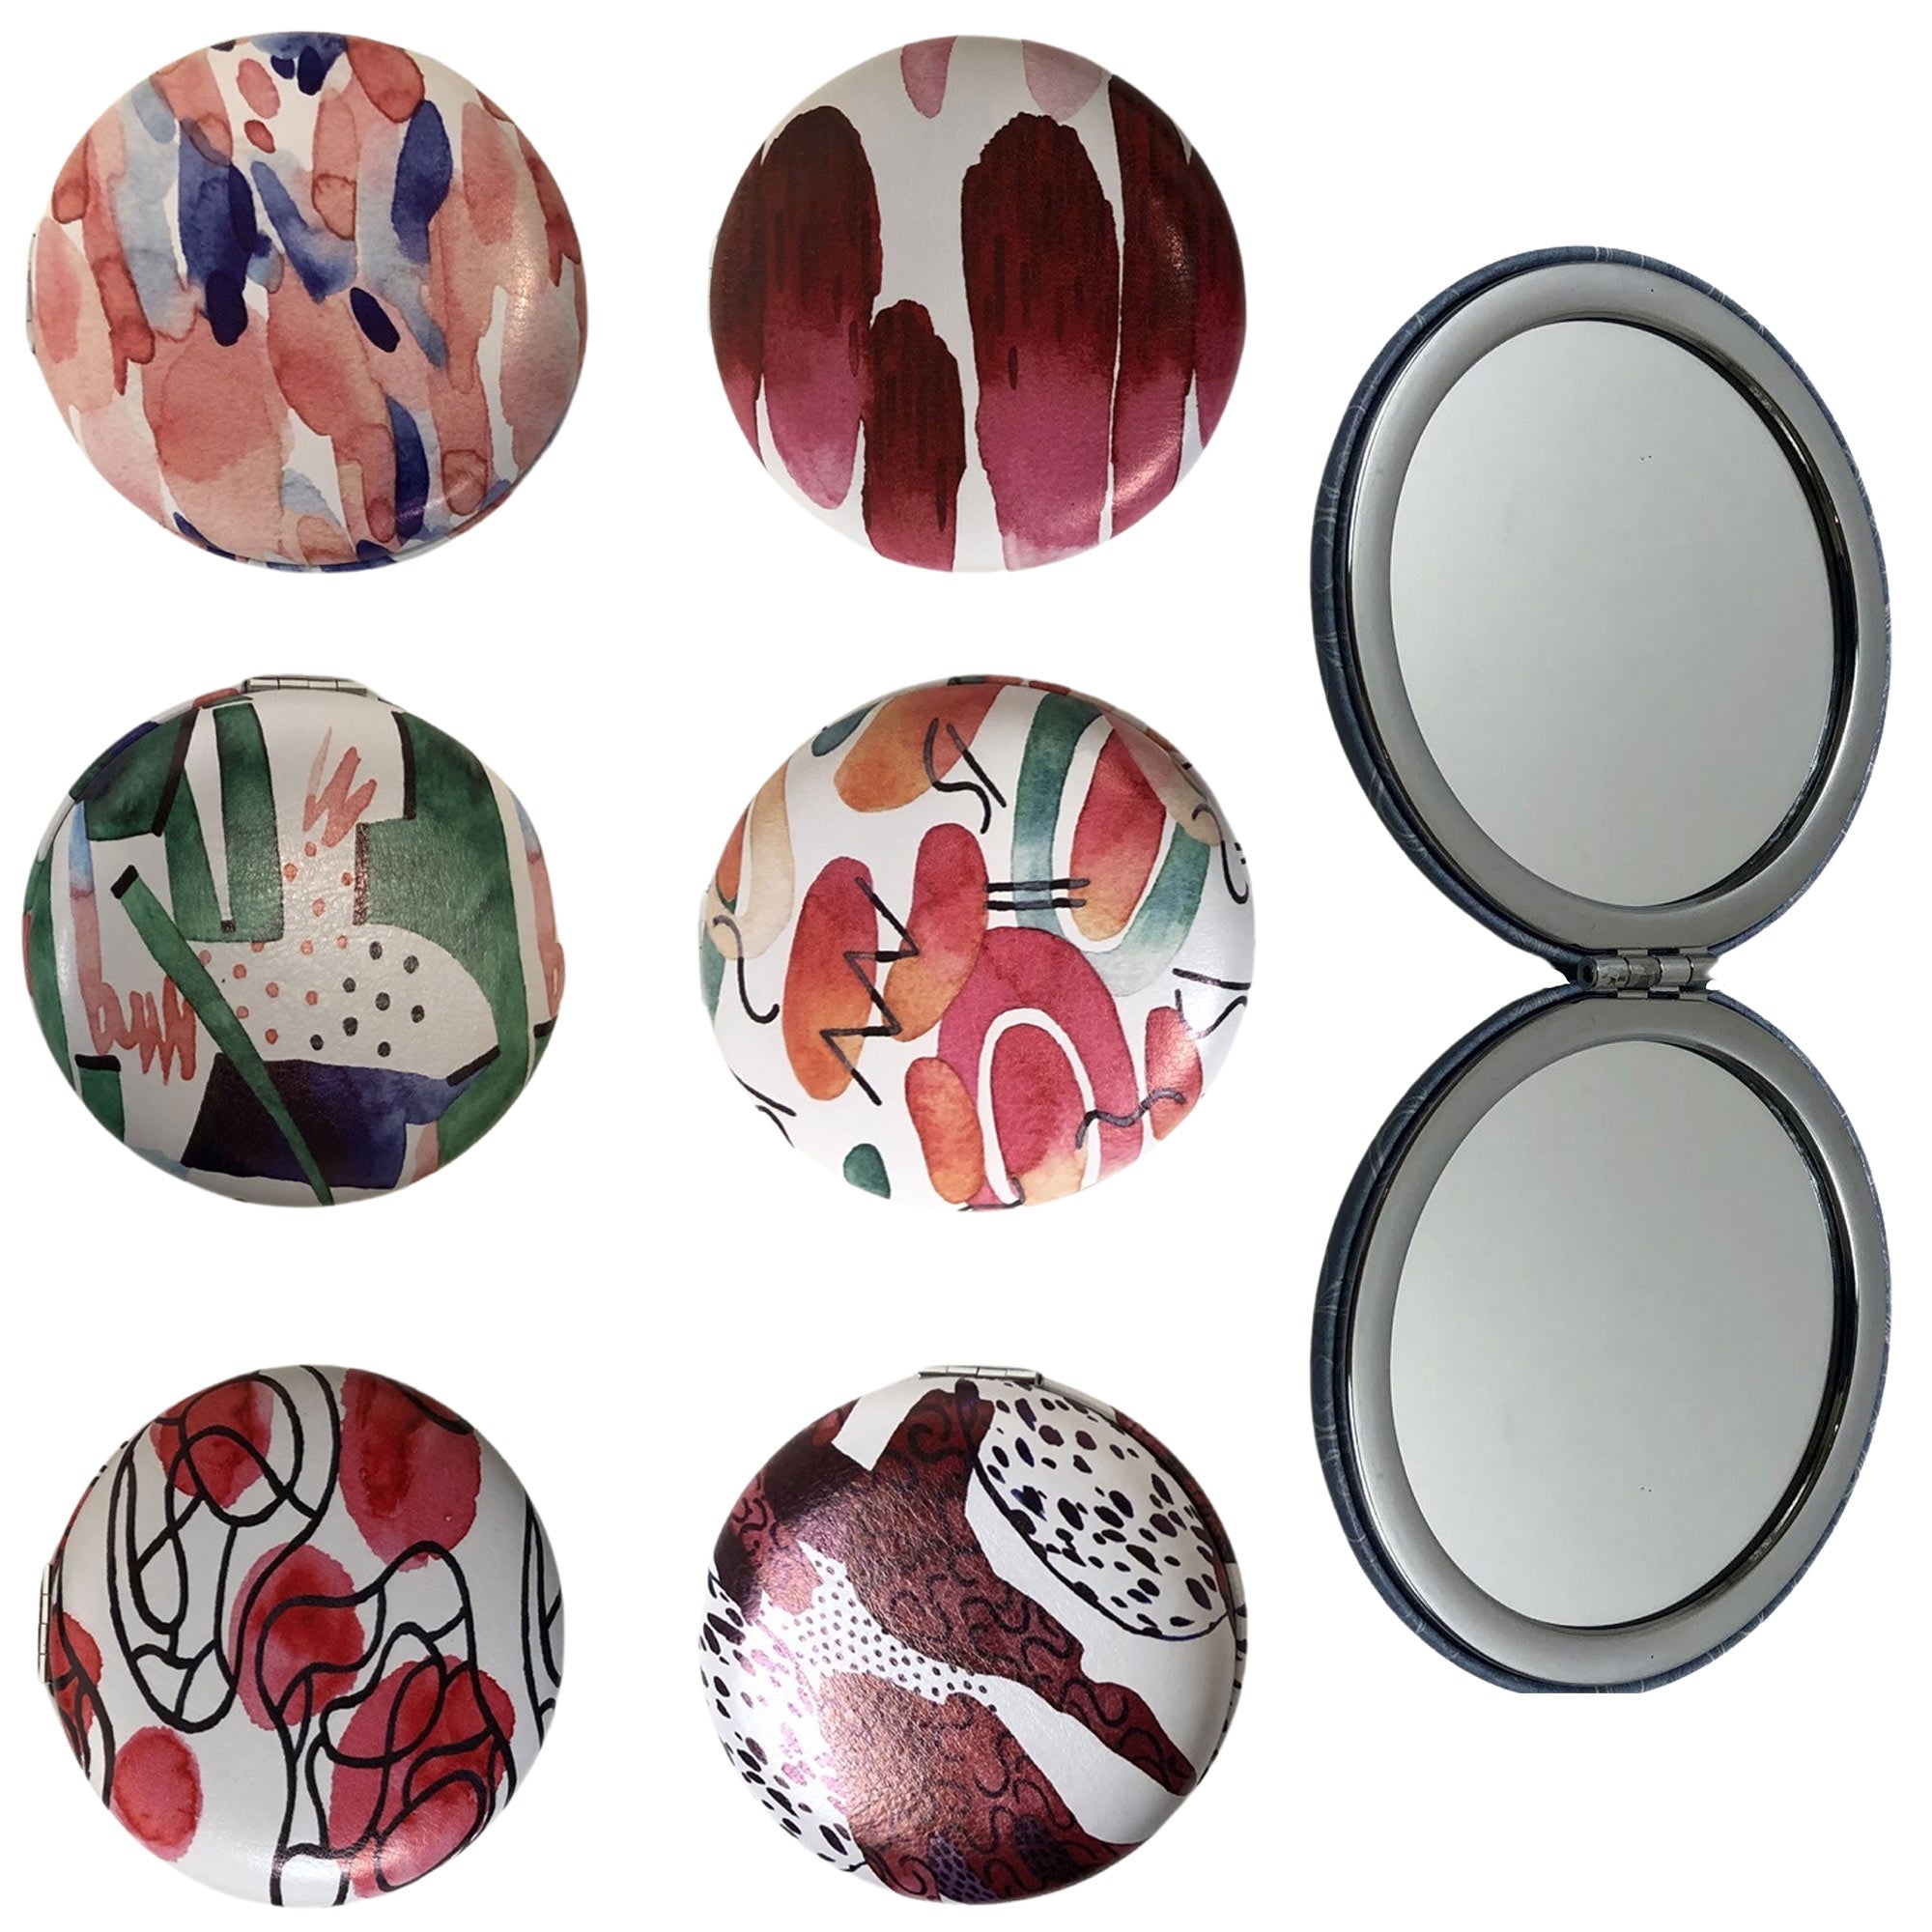 CLEARANCE COSMETIC MIRRORS GEOMETRIC PRINTS (CASE OF 48 - $1.50 / PIECE)  Wholesale Round Cosmetic Mirrors in Assorted Prints SKU: 906-GEOMETRY-48